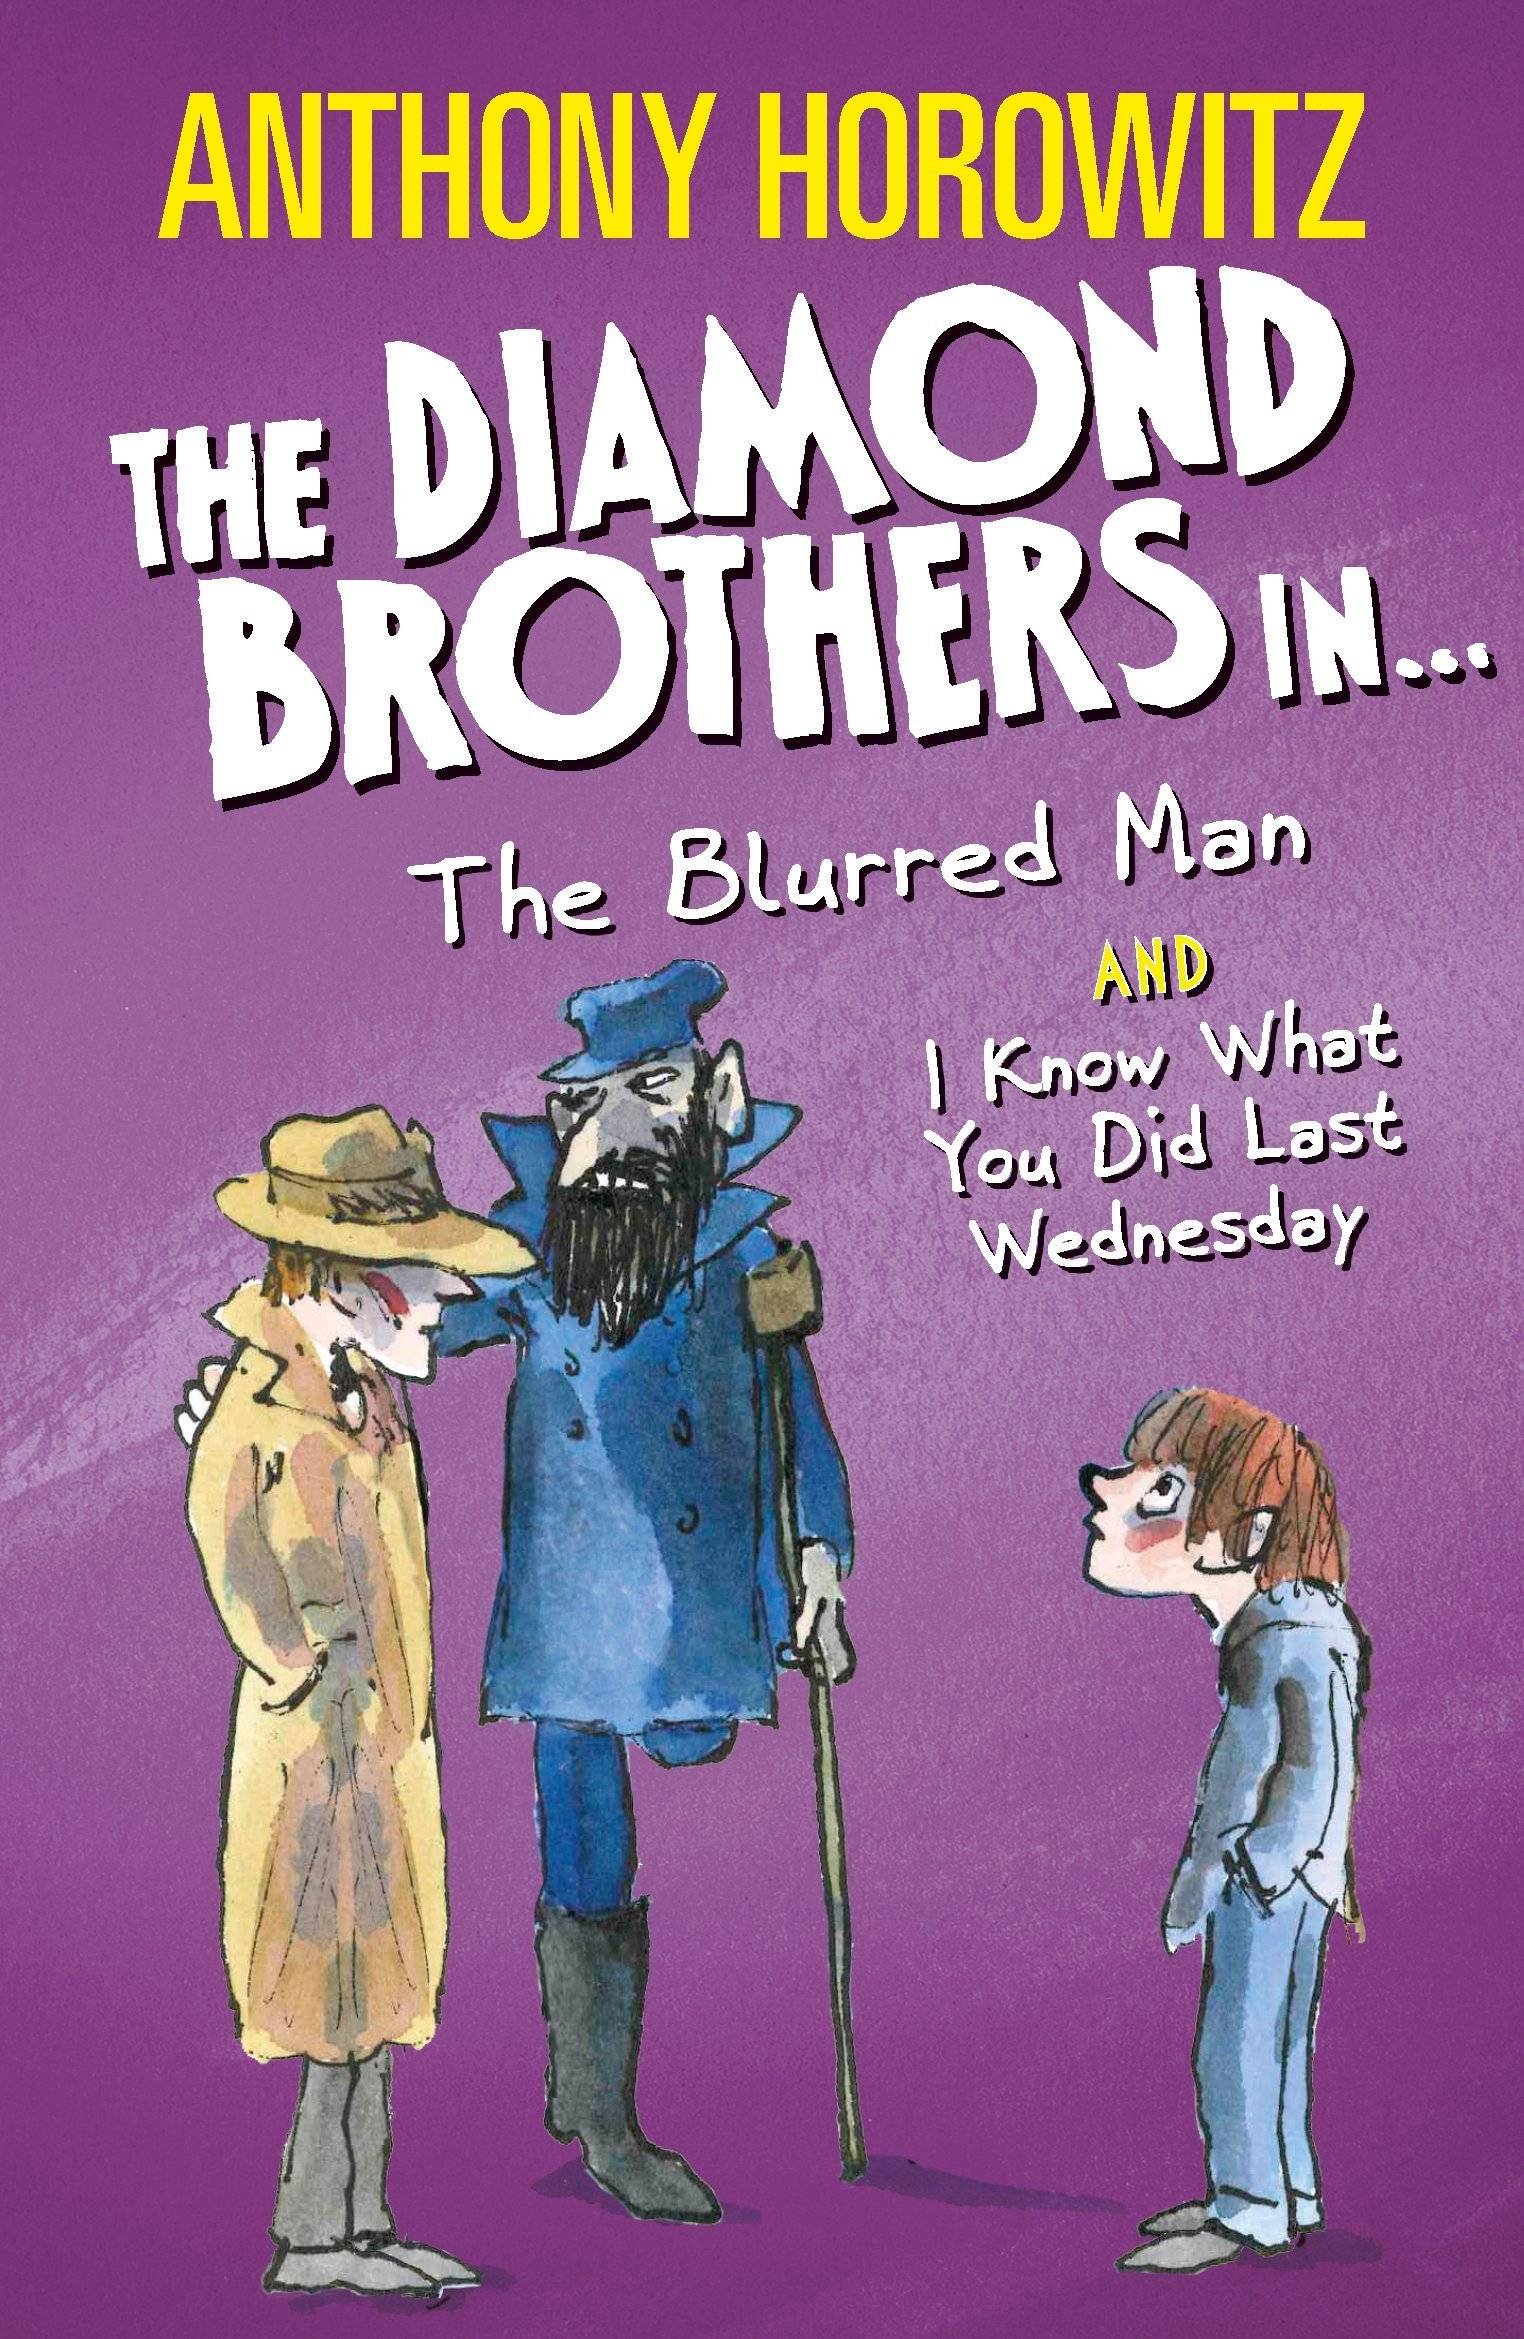 IMG : The Diamond Brothers in The Blurred Man